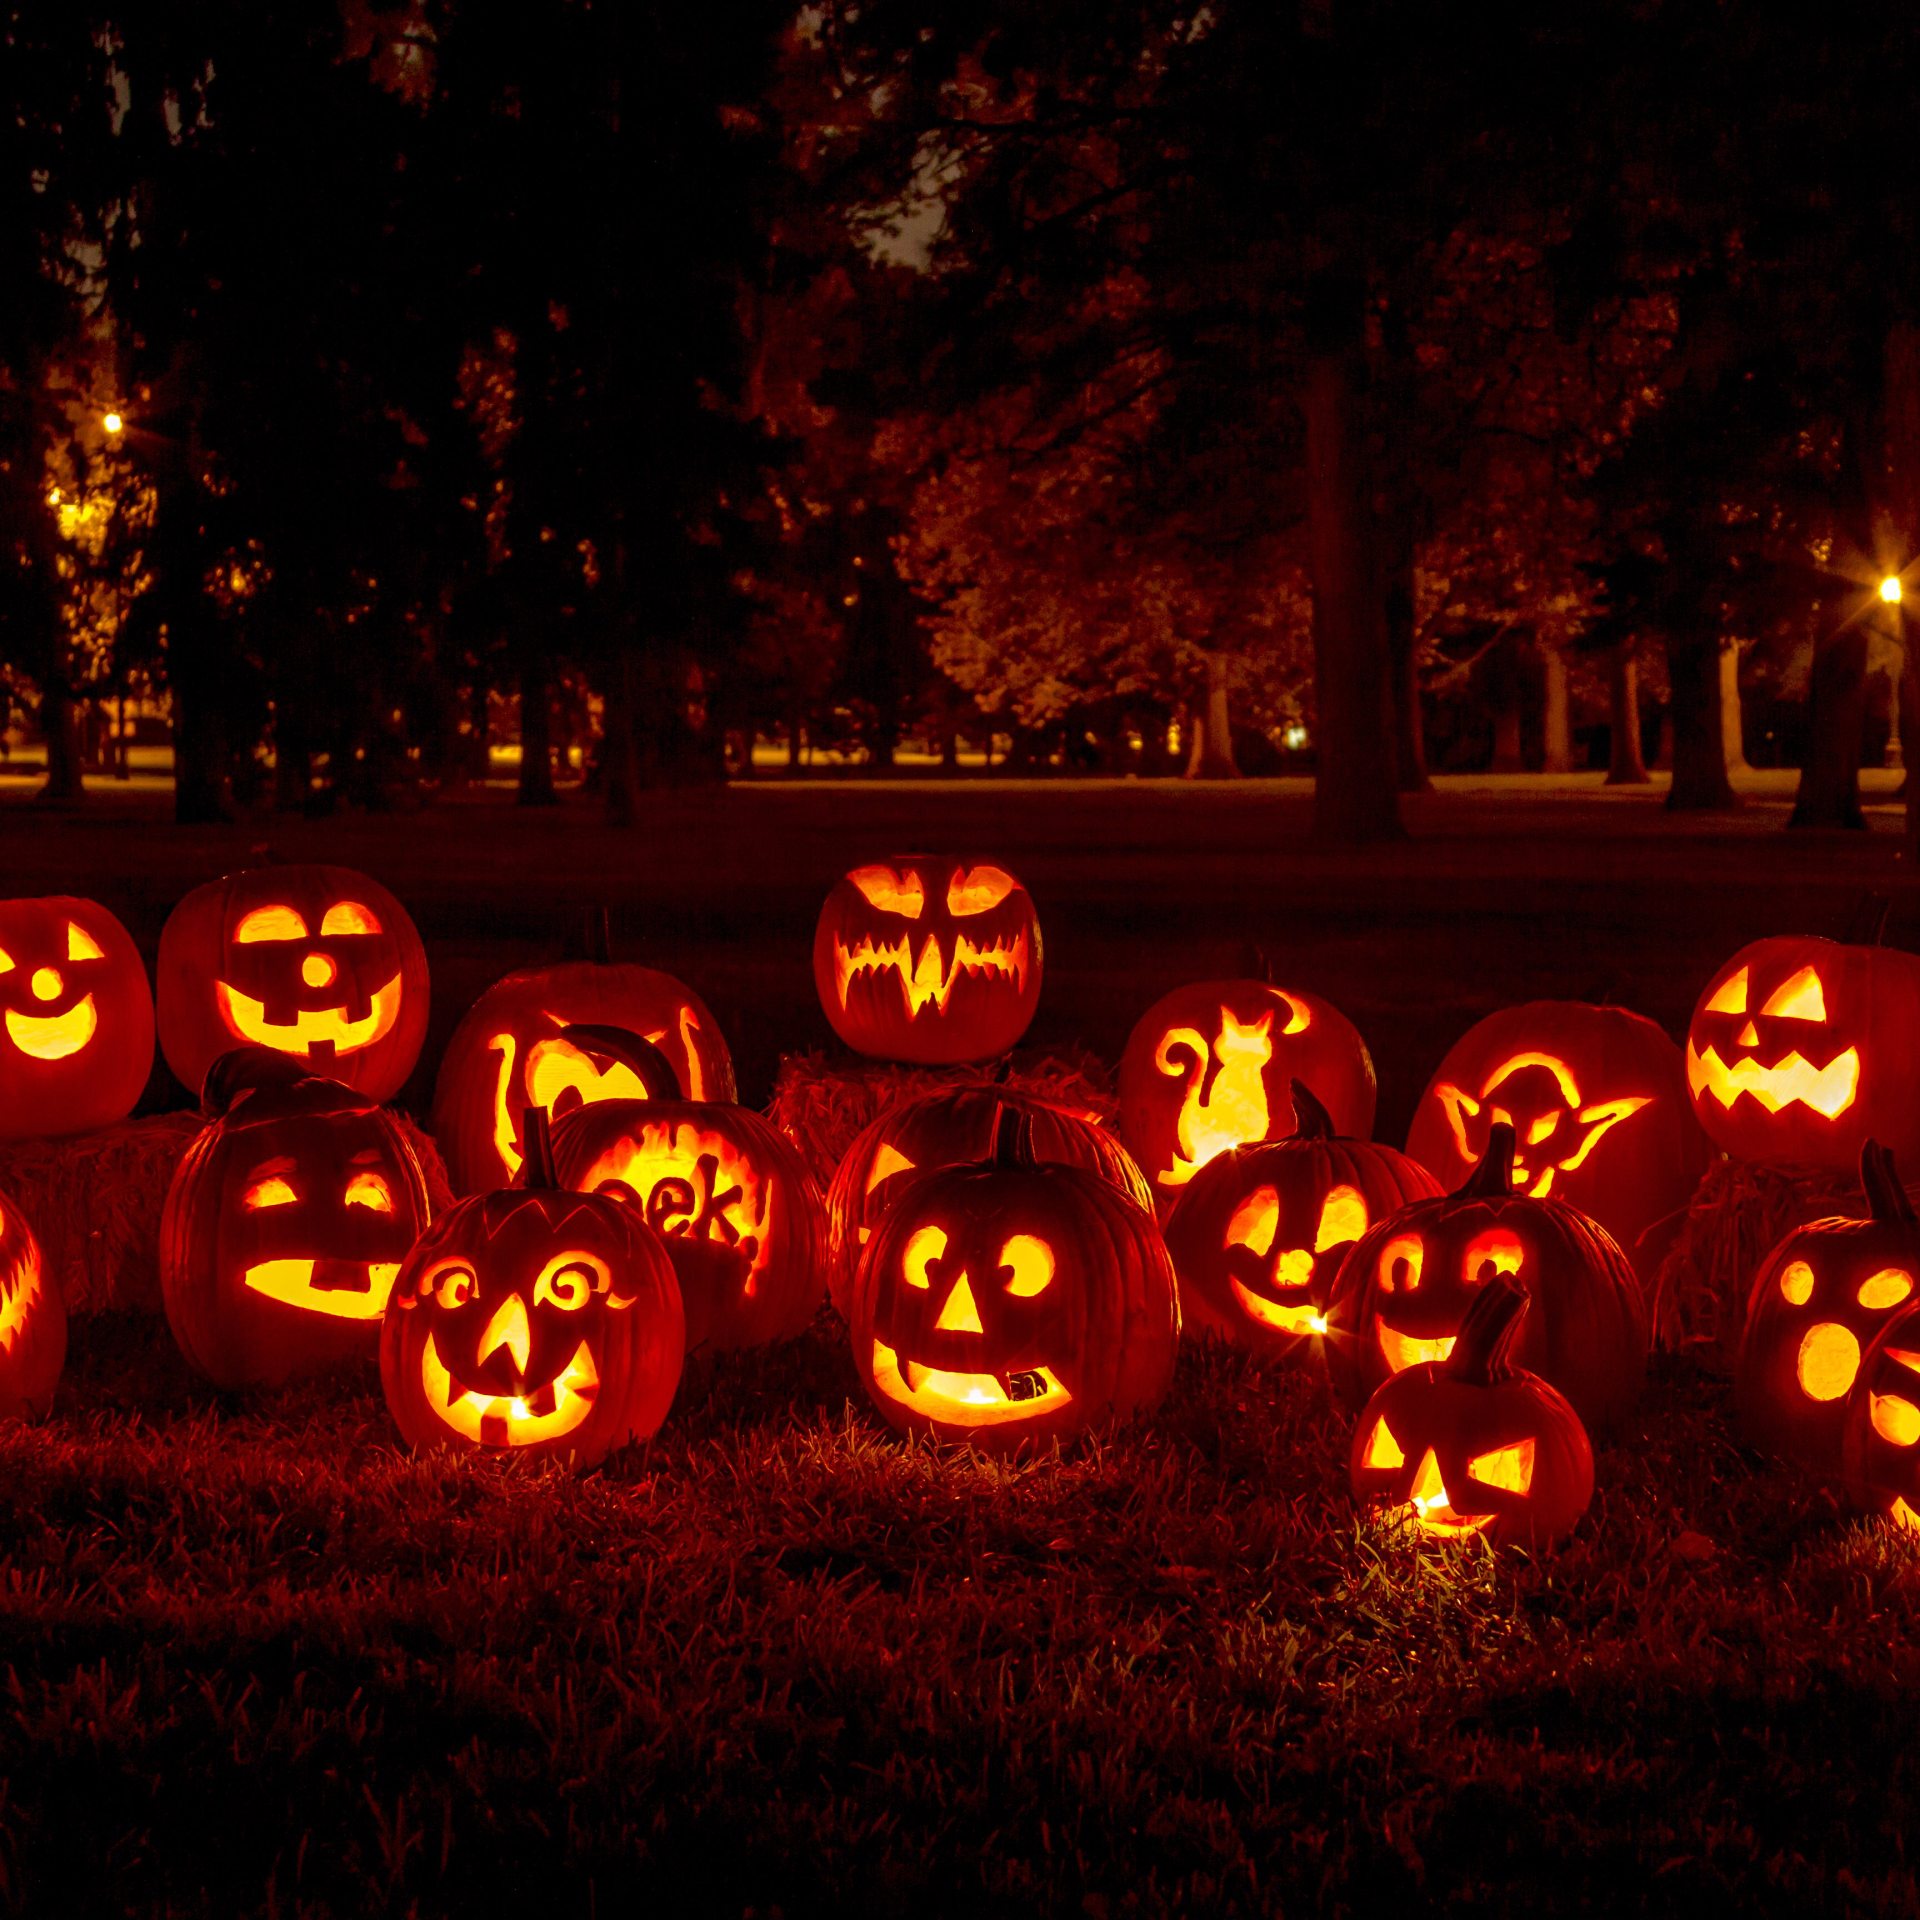 Group of candle lit carved Halloween pumpkins in park on fall evening